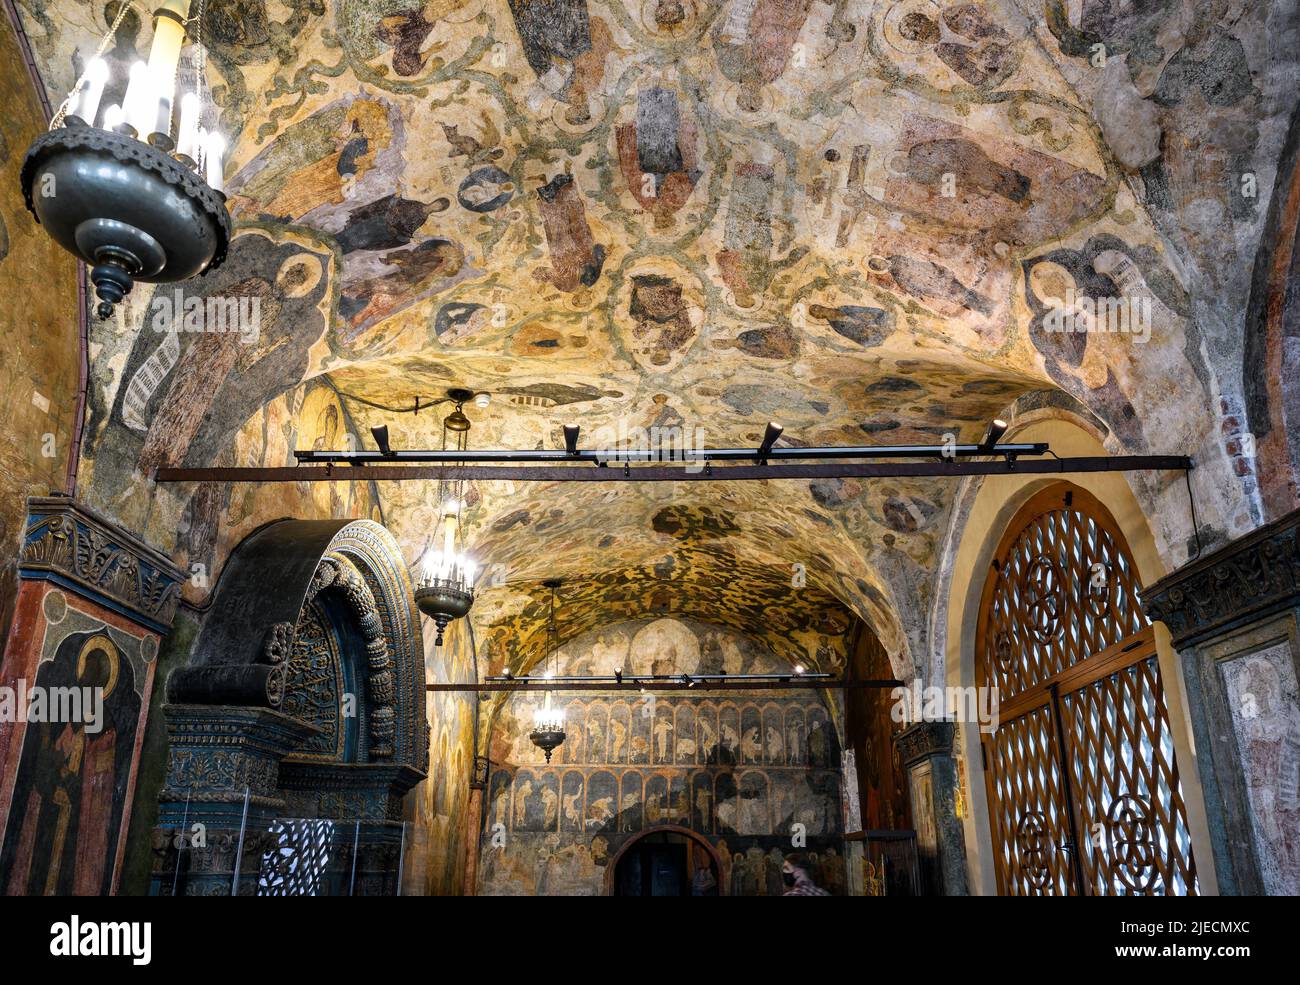 Moscow - Jun 2, 2021: Painting inside Archangel Cathedral in Moscow Kremlin, Russia. Ancient frescoes in Russian temple, historical landmark of Moscow Stock Photo